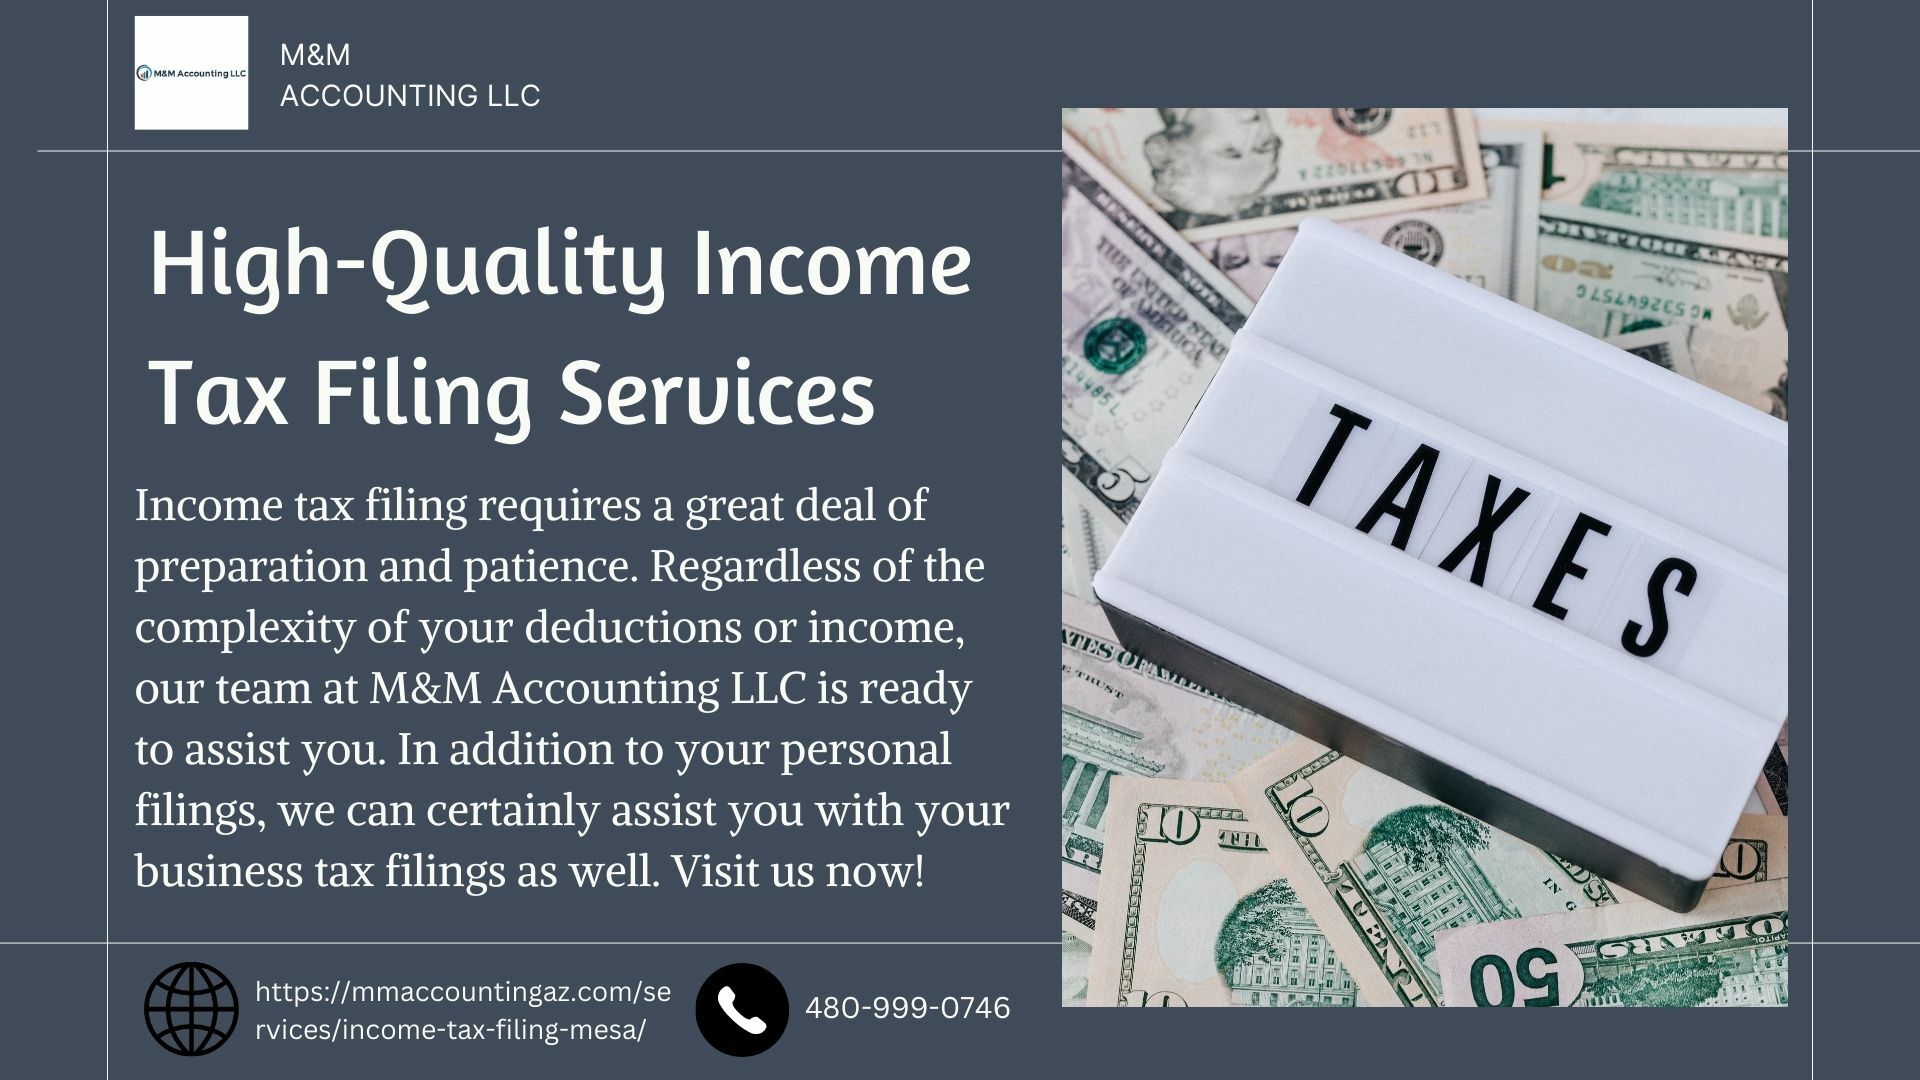 High-Quality Income Tax Filing Services.jpg